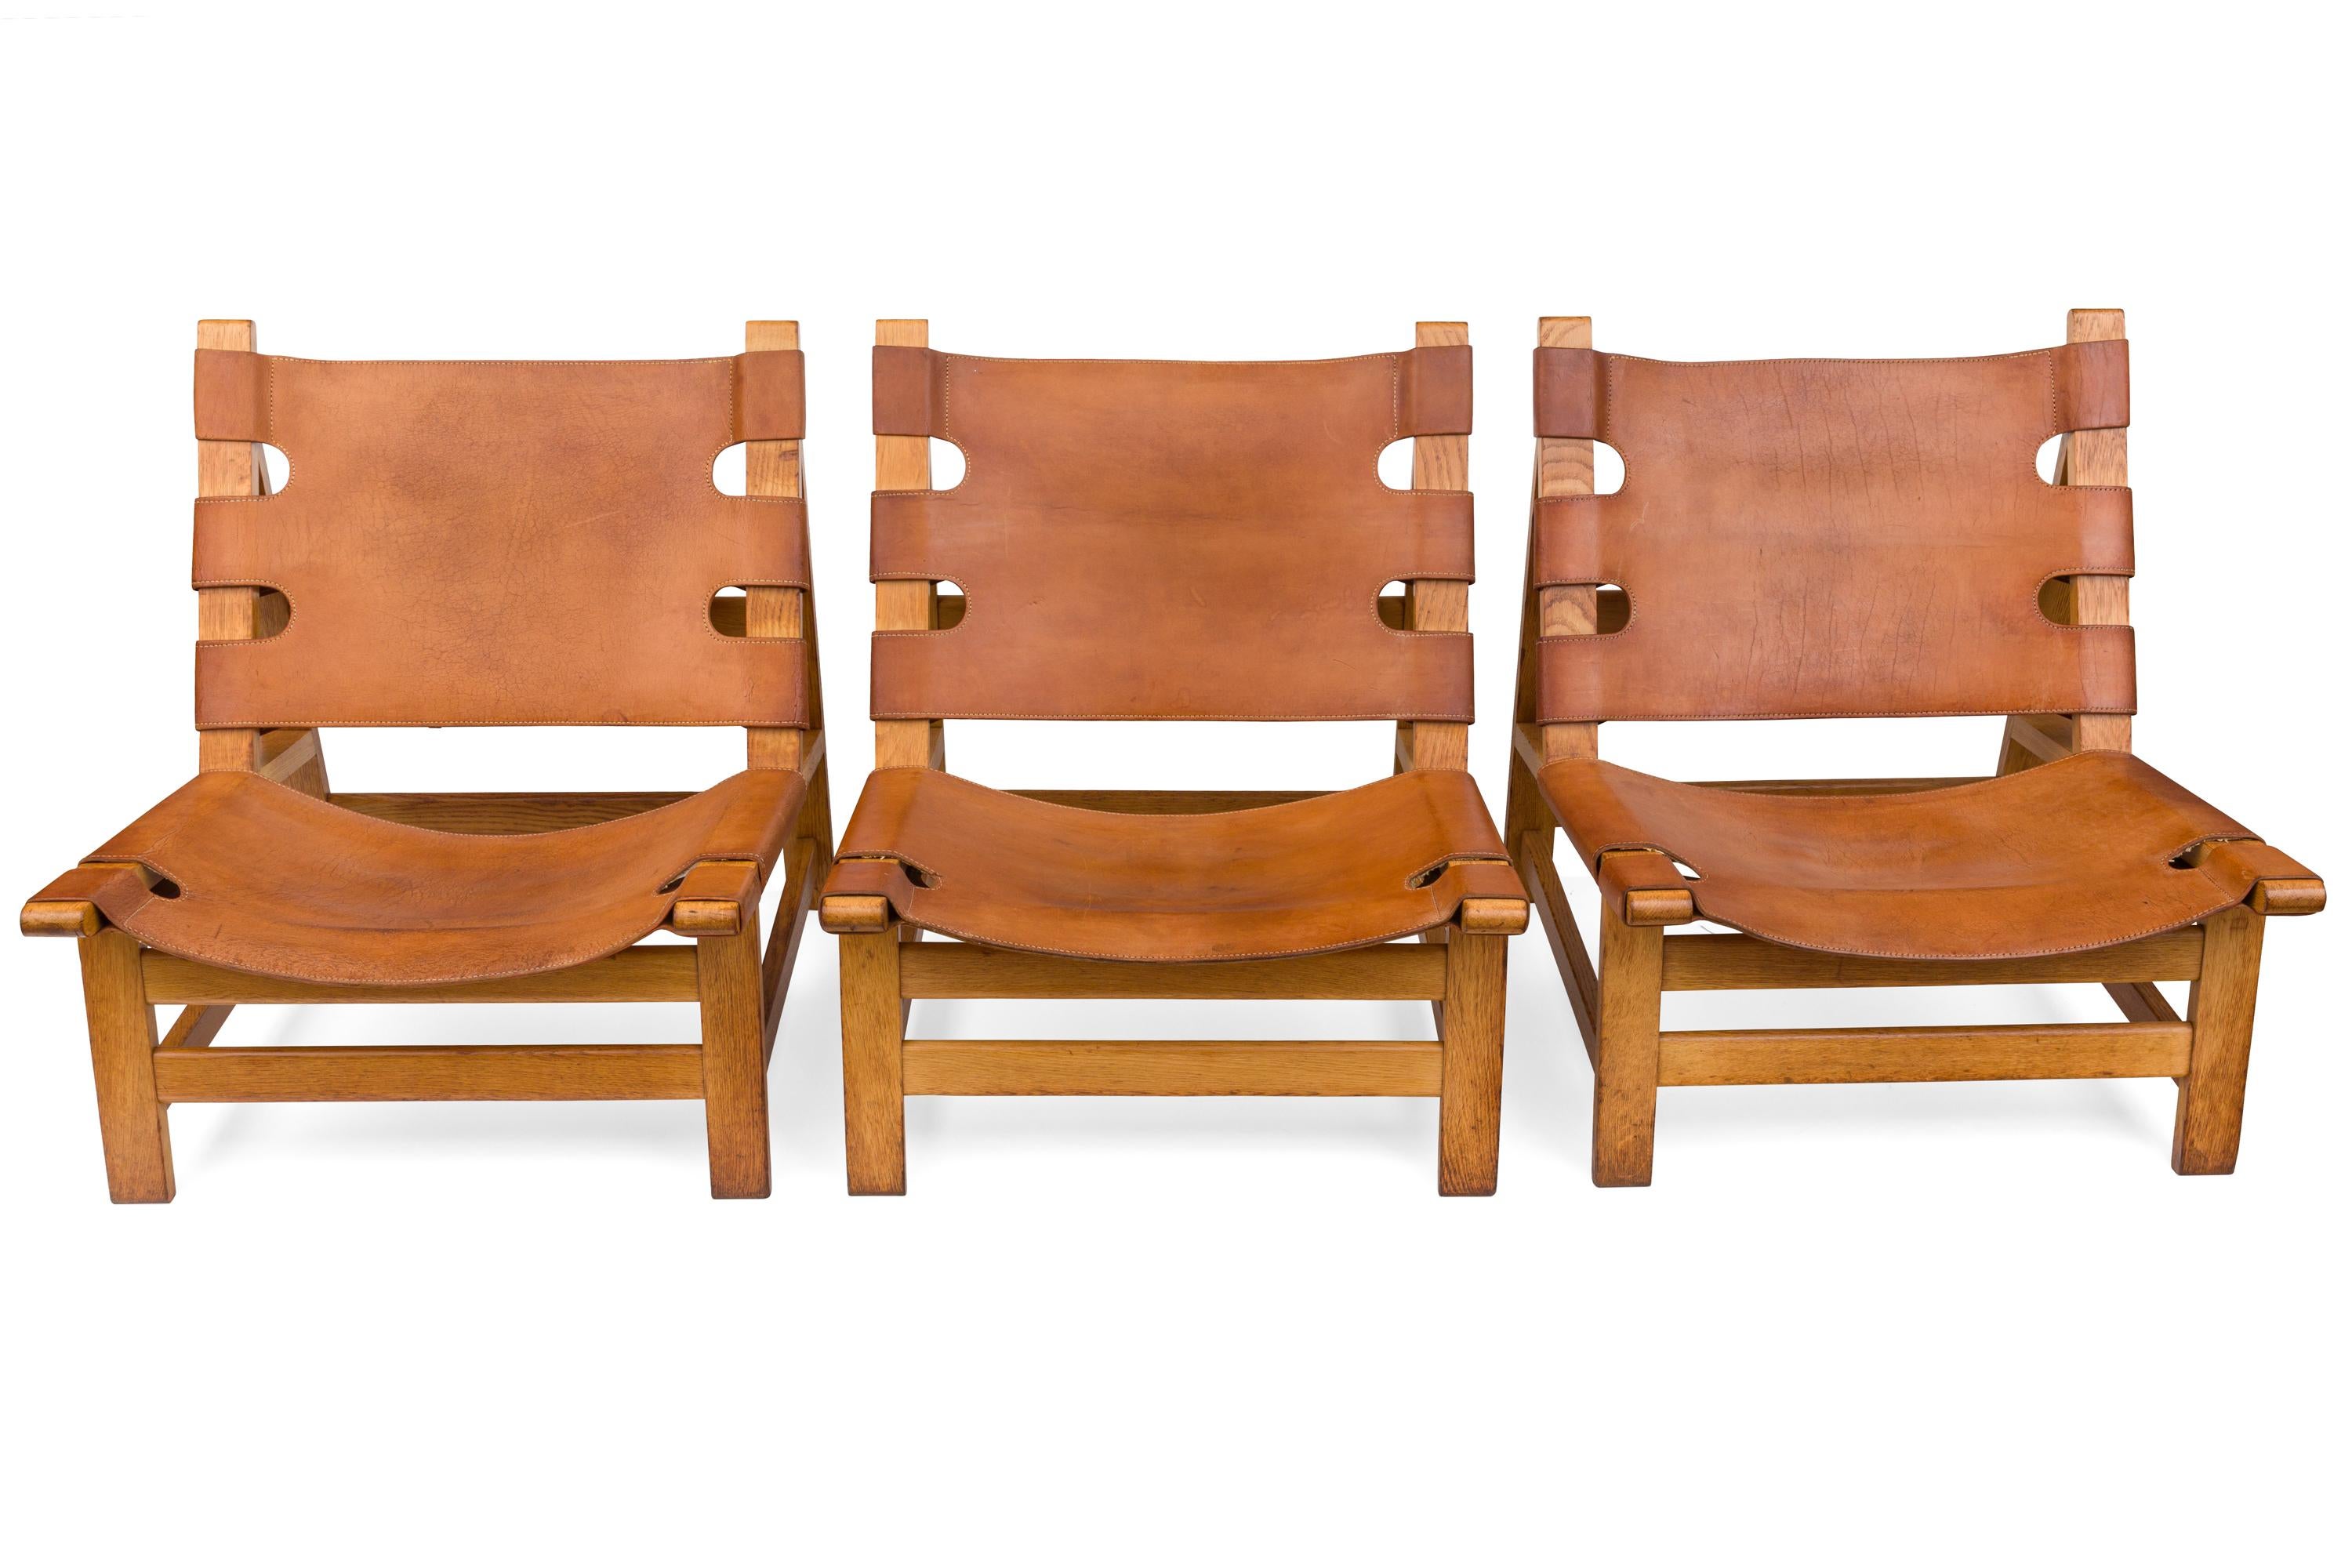 A rare set of low lounge chairs with frames of solid oak. The seat and back with patinated brown grain leather. These examples were manufactured by Fredericia Stolefabrik.  Two of the chairs in the listing were sold, there are four remaining for